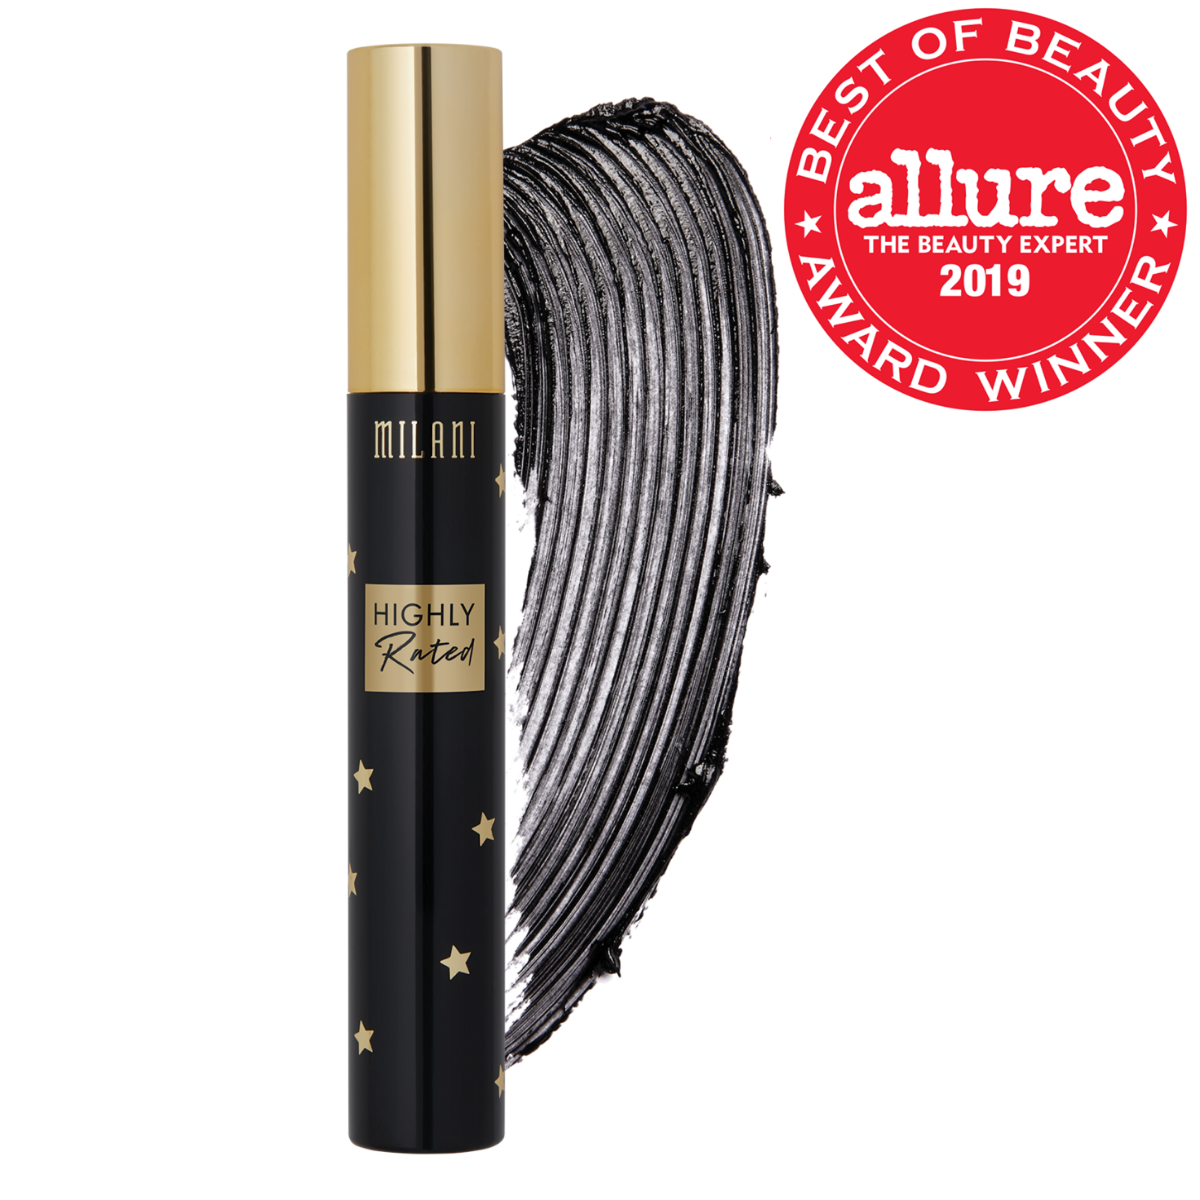 MILANI Highly Rated 10-in-1 Volume Mascara